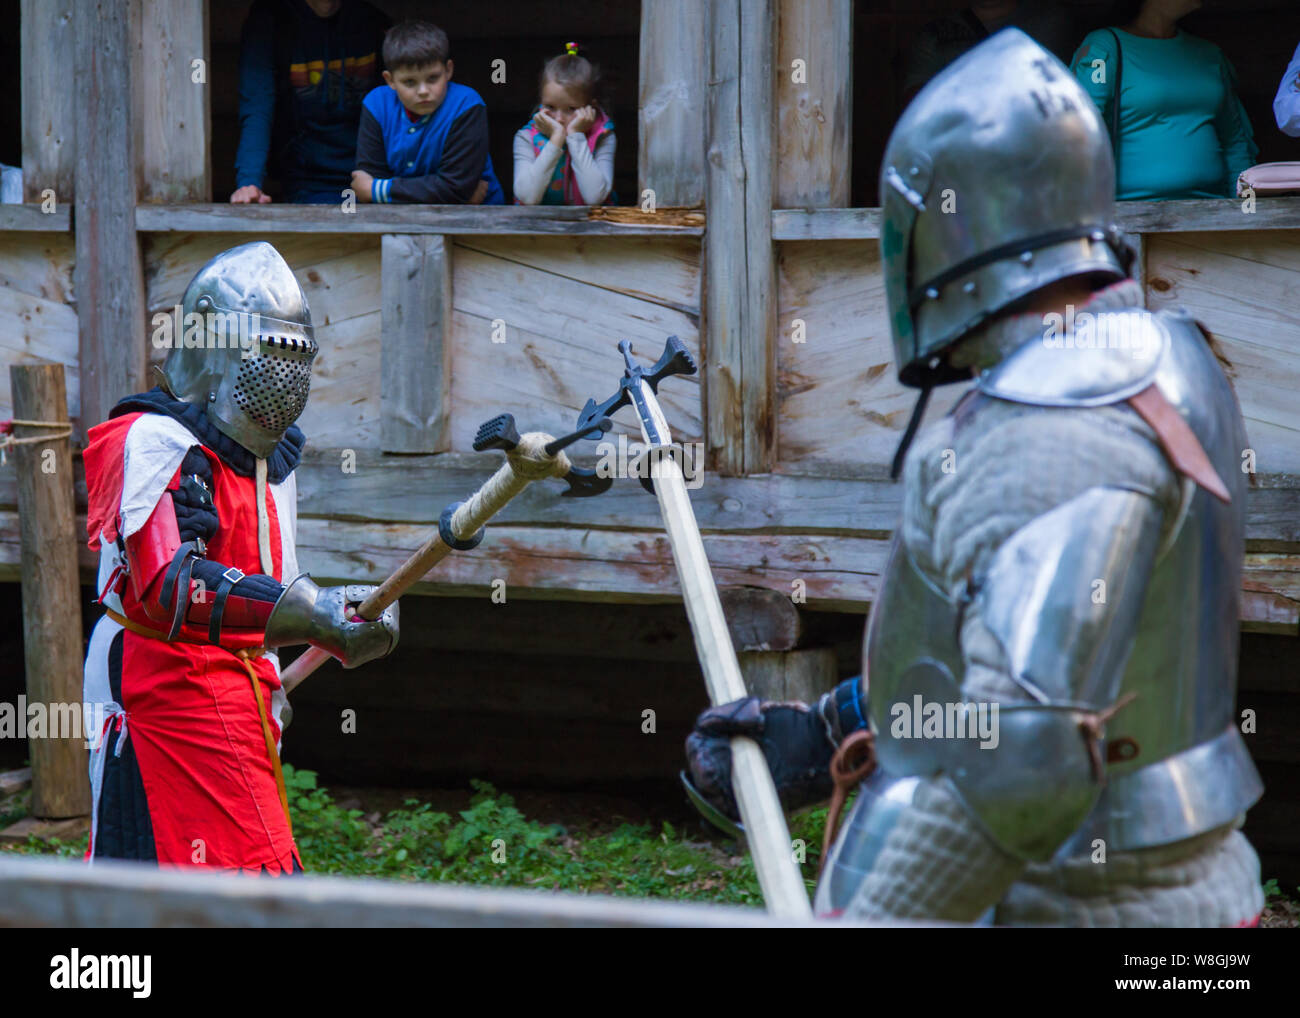 Two medieval knights fighting Stock Photo